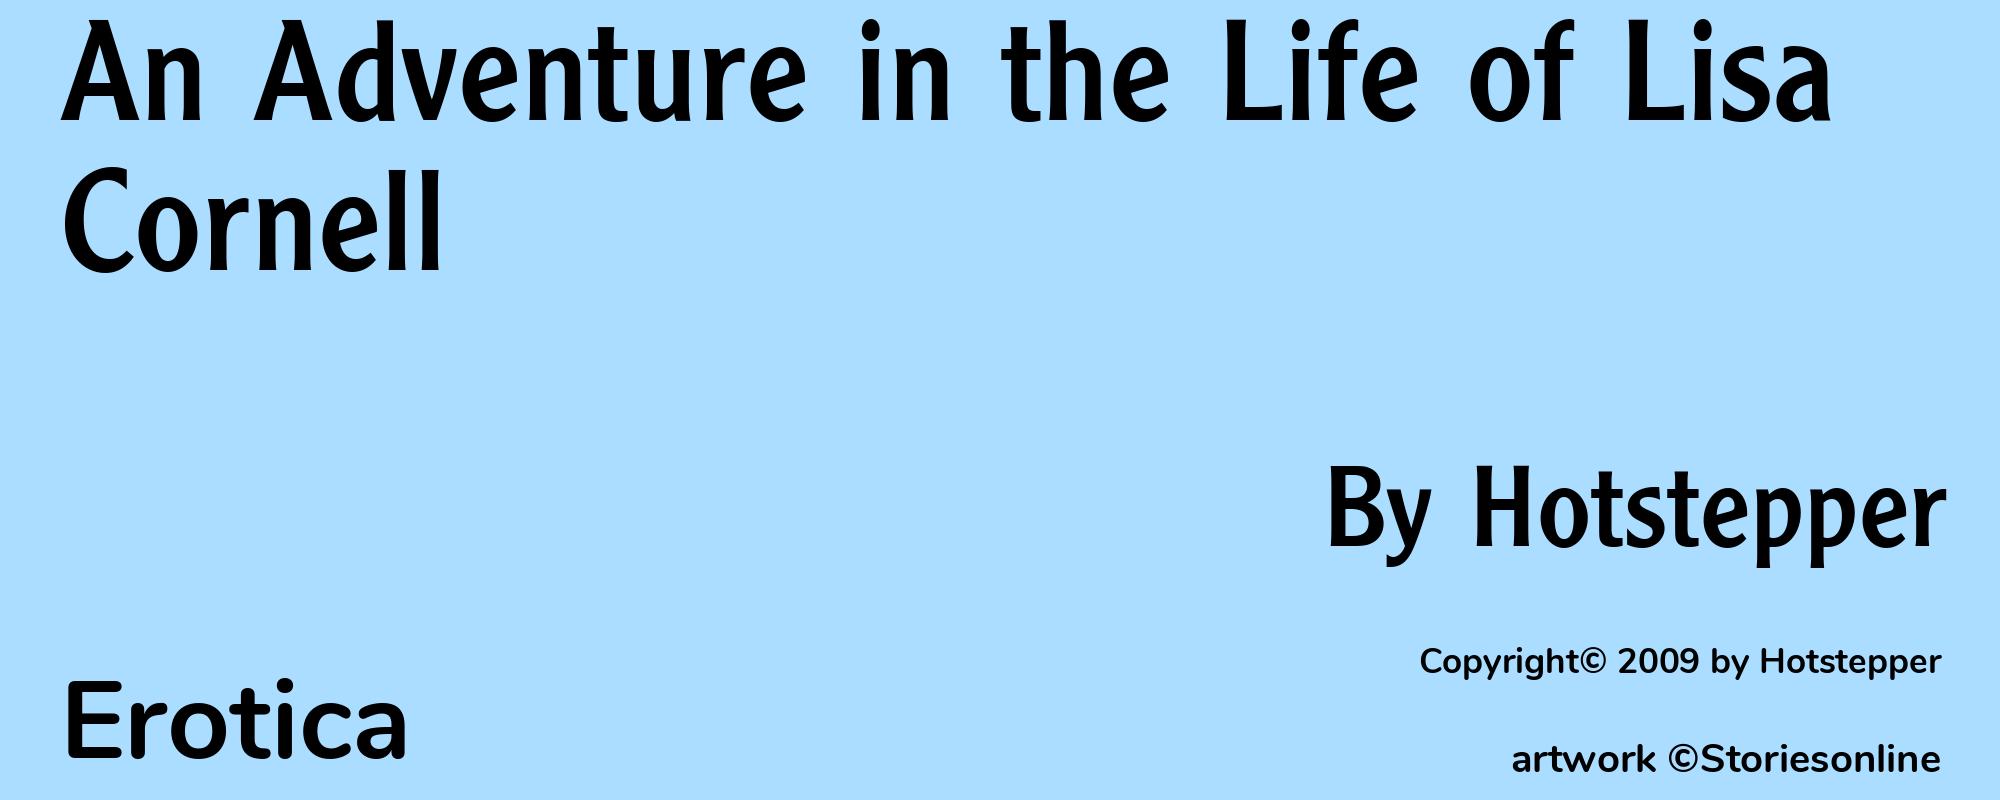 An Adventure in the Life of Lisa Cornell - Cover